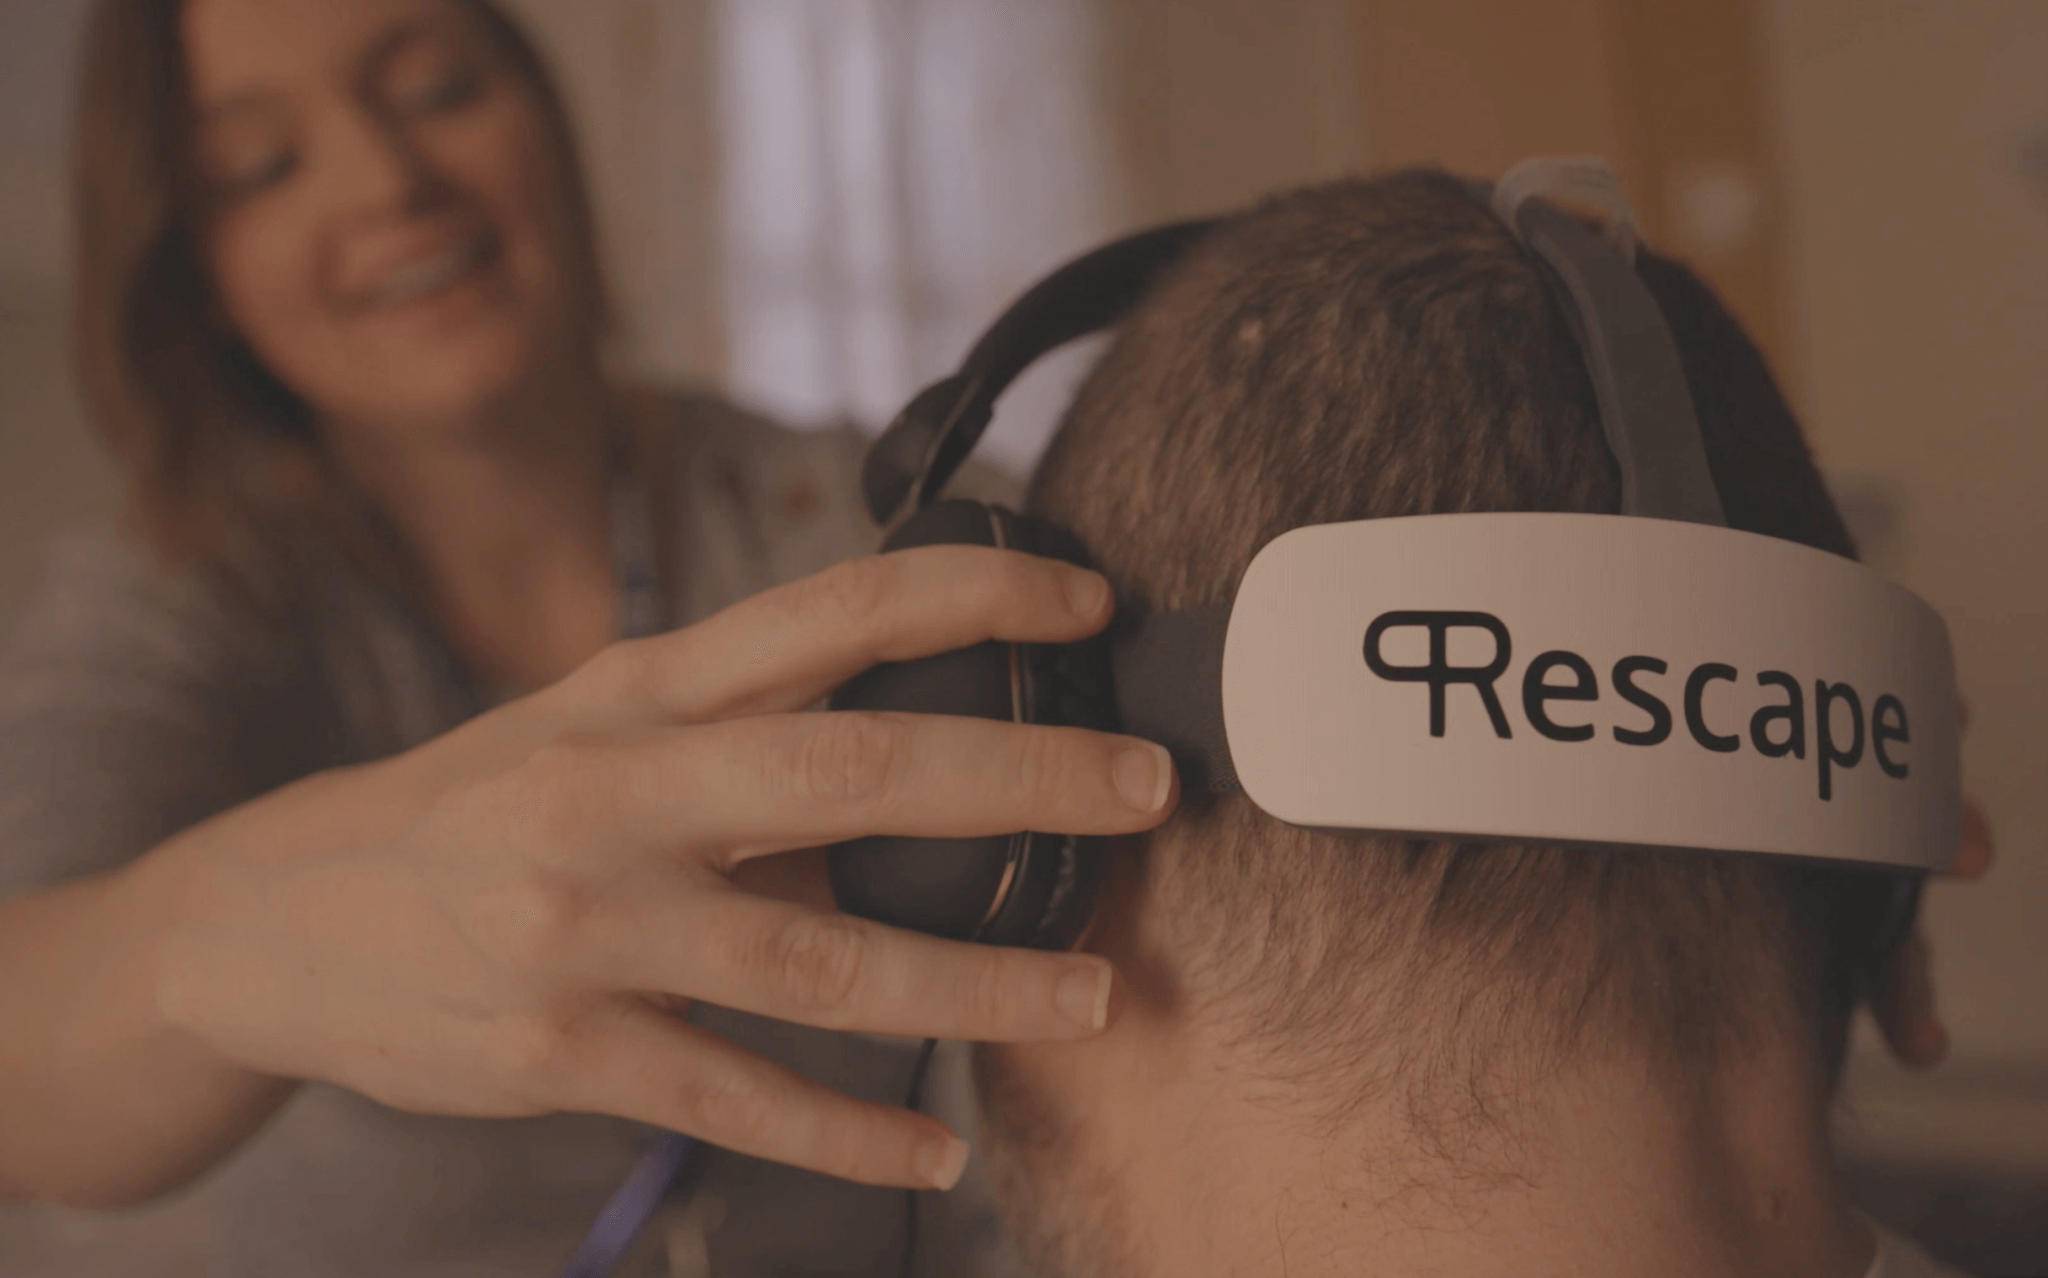 A virtual reality headset is put on a person's head